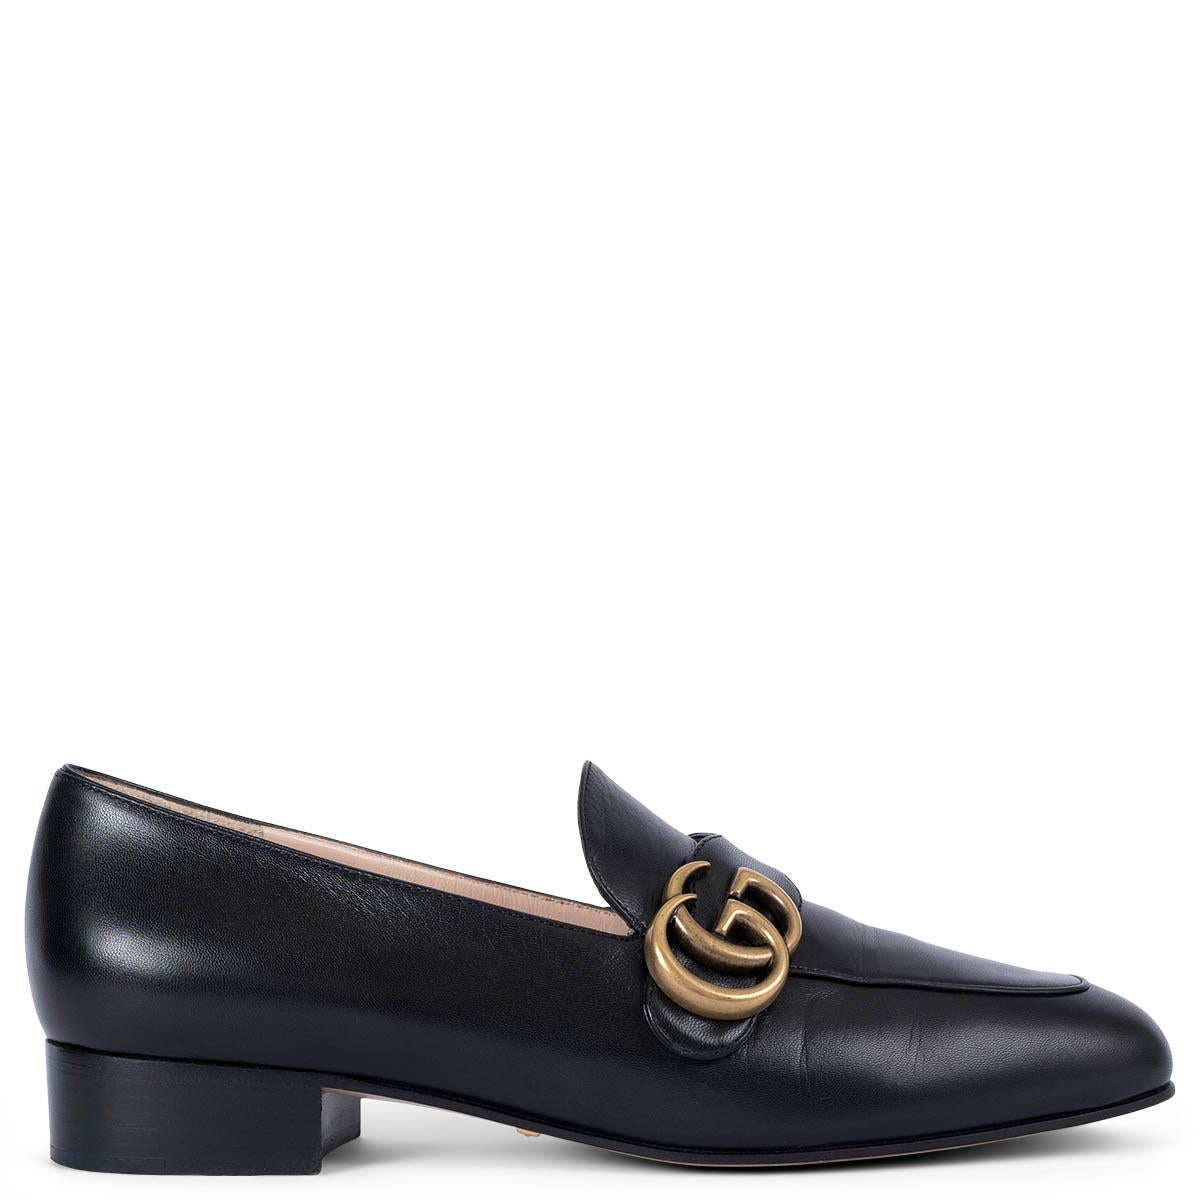 GUCCI black leather GG MARMONT Loafers Shoes 38